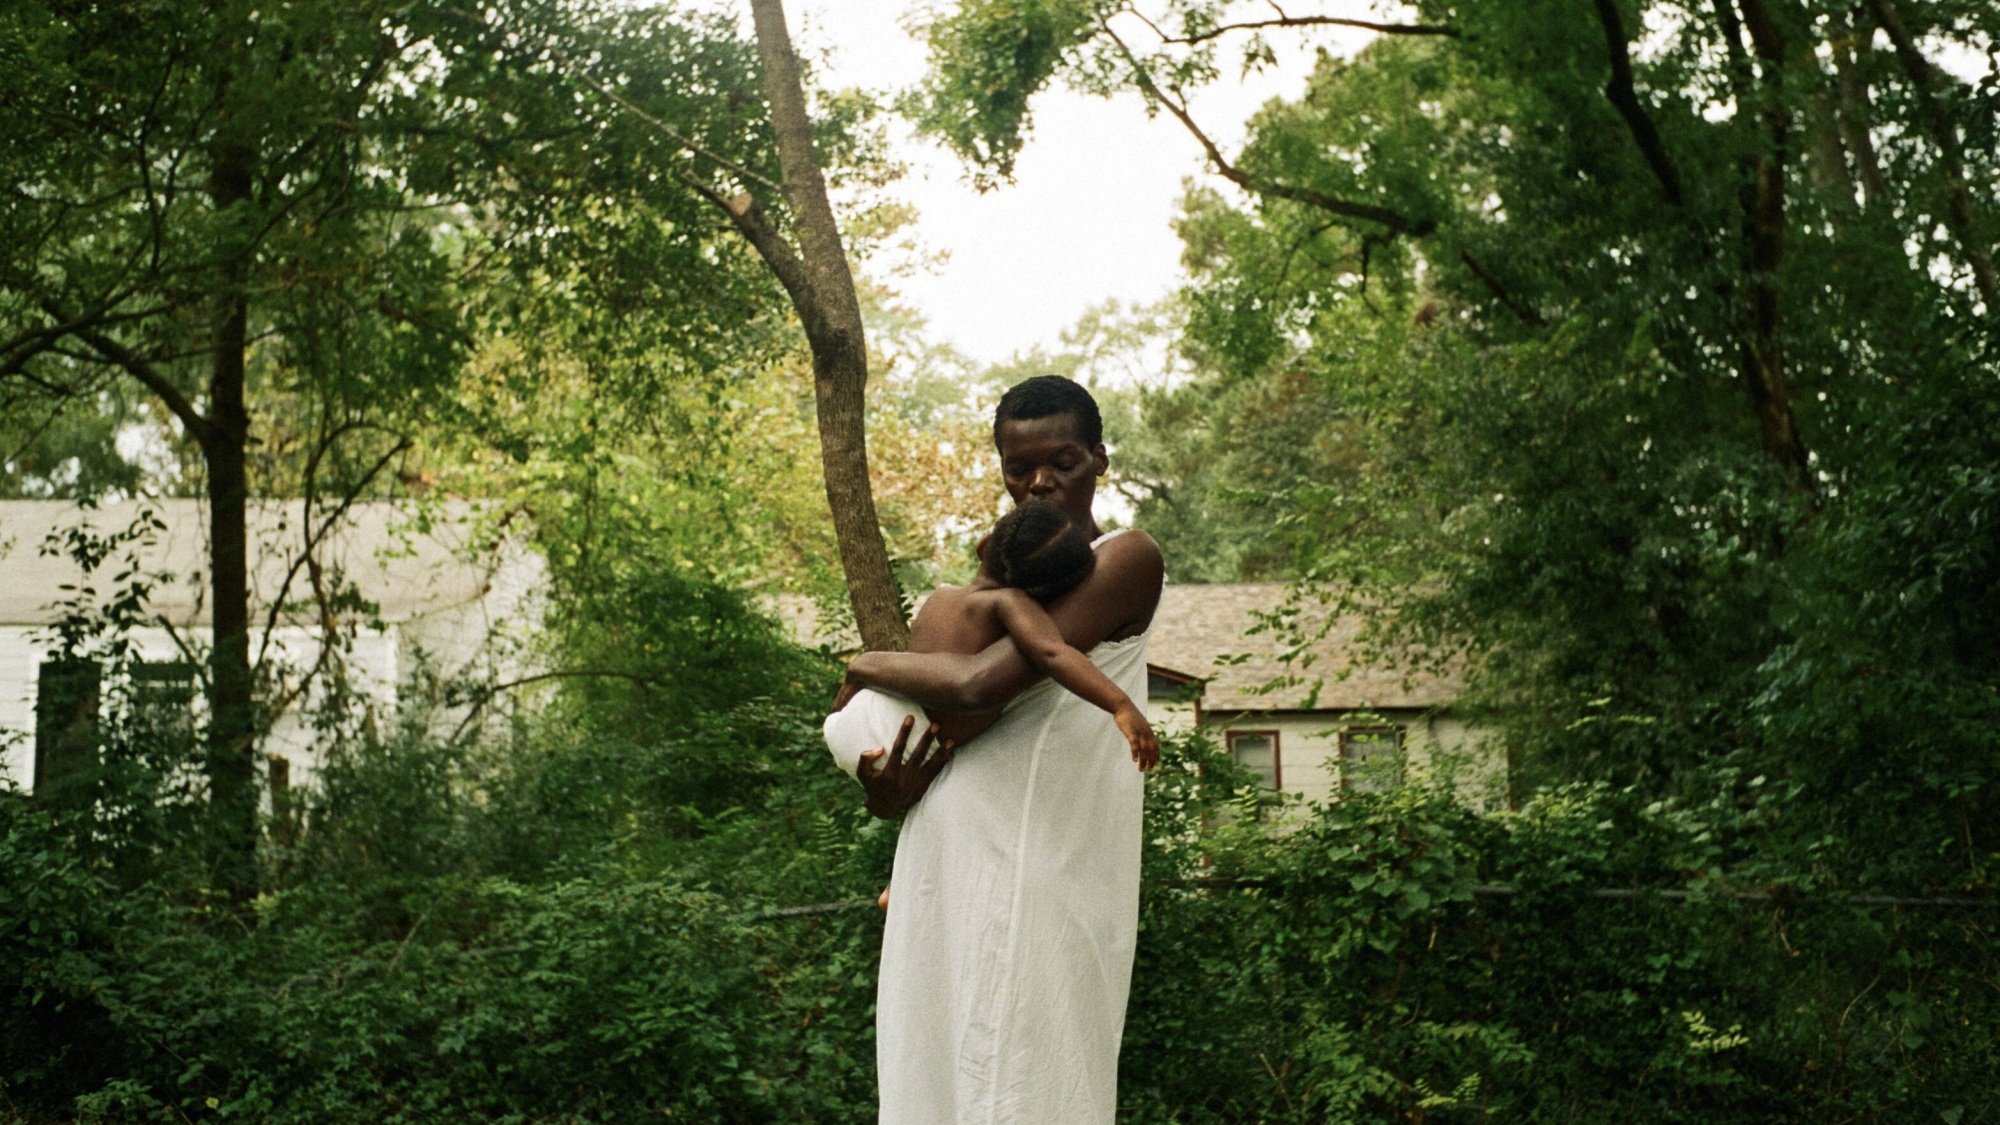 A woman in a white dress holds her baby while standing outside among green trees.